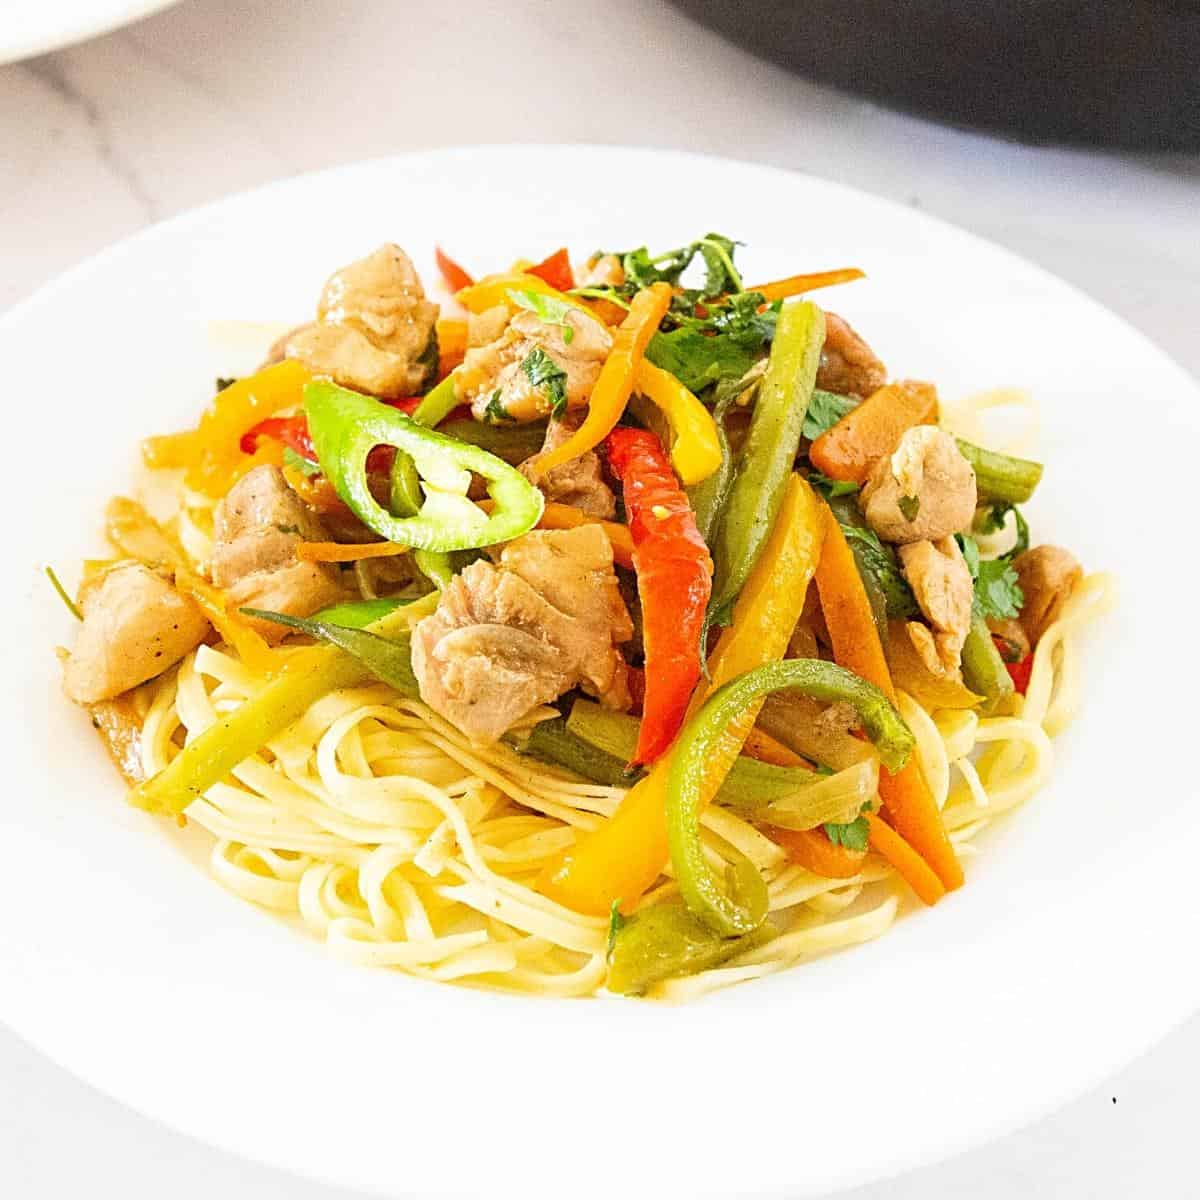 A plate with boiled noodles and chicken stir fry.